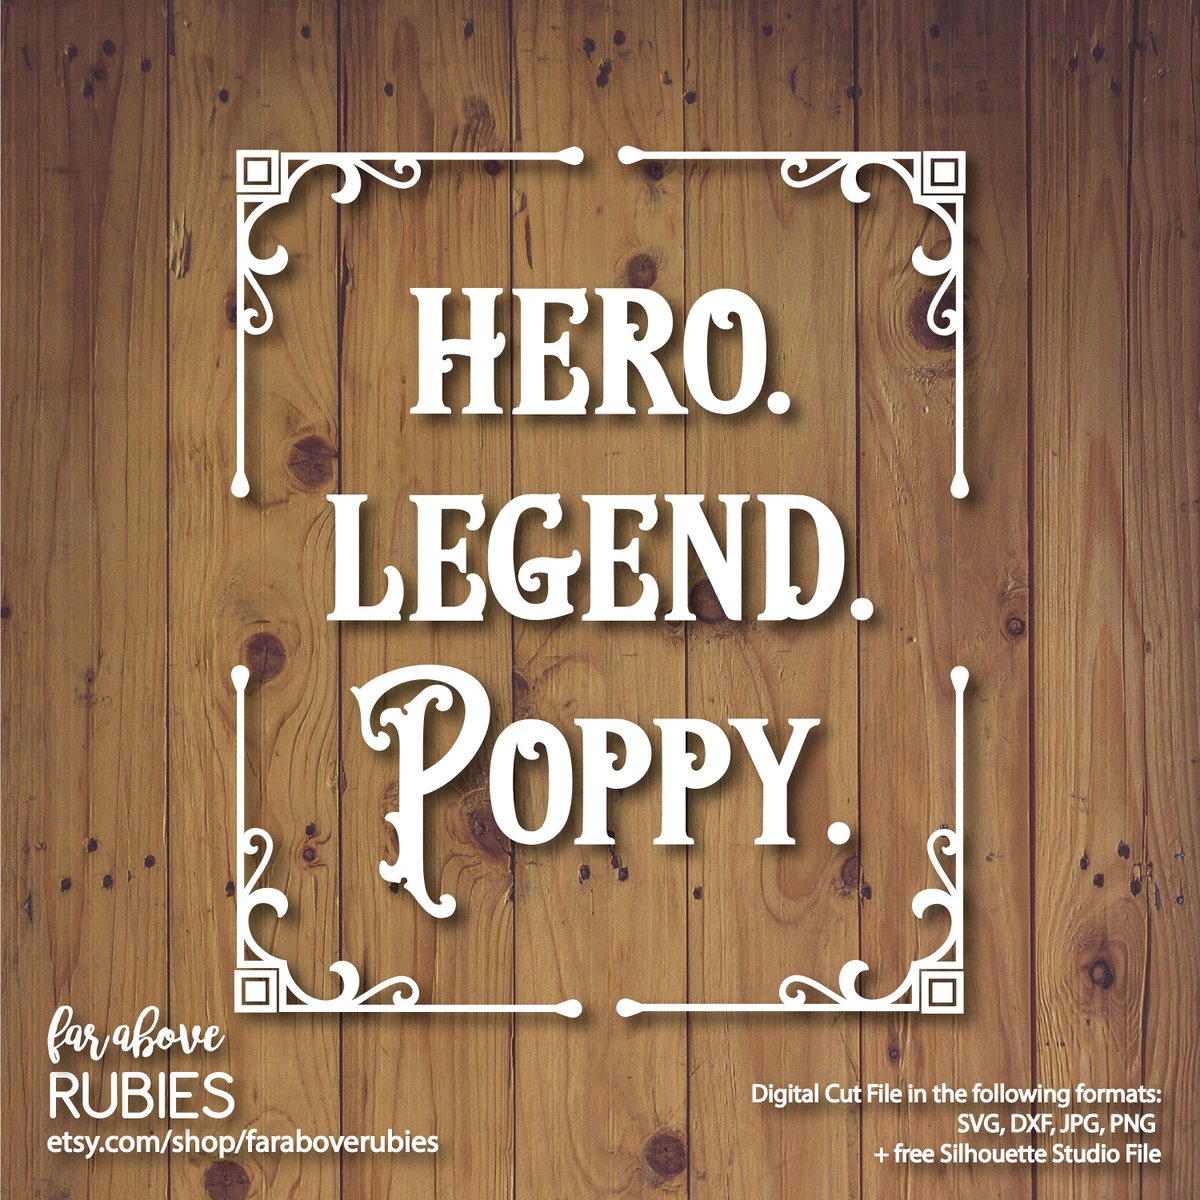 Download Faraboverubies On Twitter Hero Legend Poppy For Grandfather Father S Day Western Digital Cut File For Silhouette Or Cricut Https T Co 6ynjtgkc2k Etsyshop Babyshower Fathersday Papaw Hero Legend Poppy Western Svg Https T Co Jeancdmnj3 SVG, PNG, EPS, DXF File